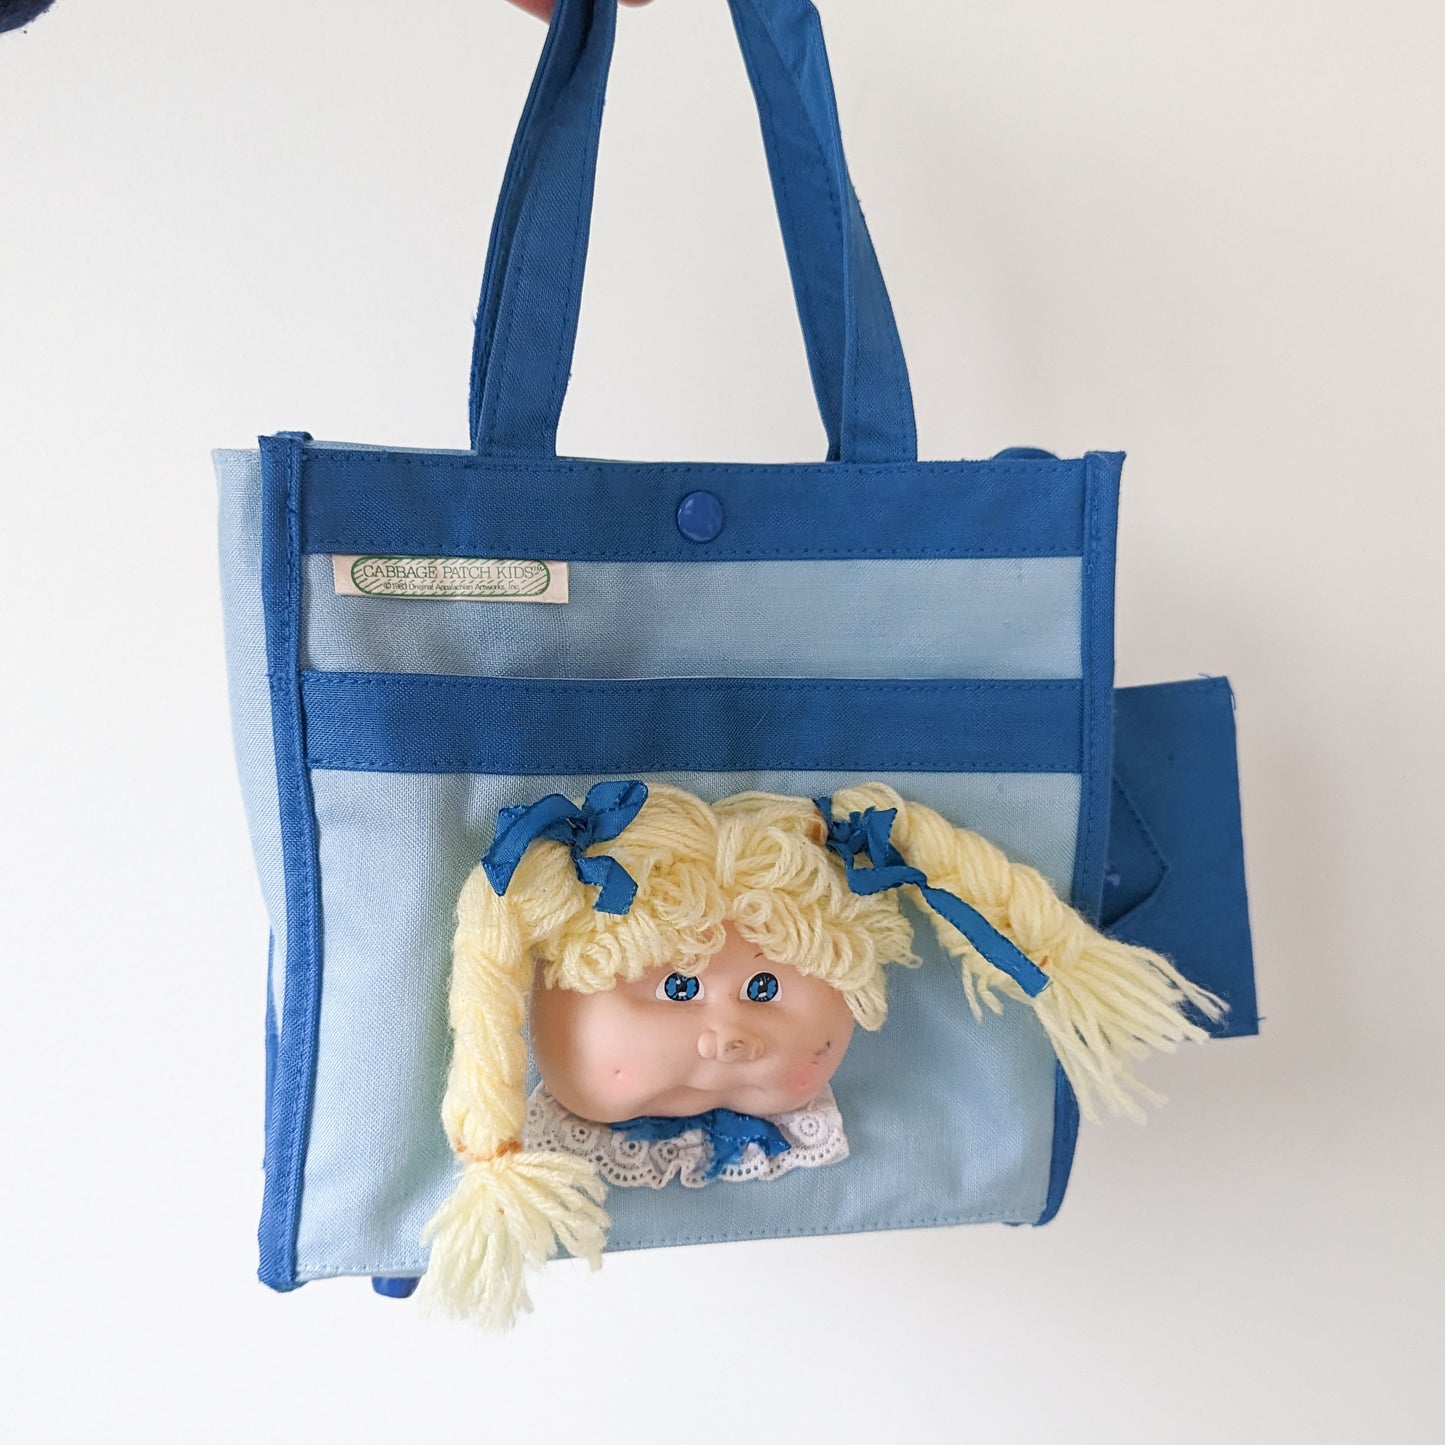 Vintage Cabbage Patch Tote Bag